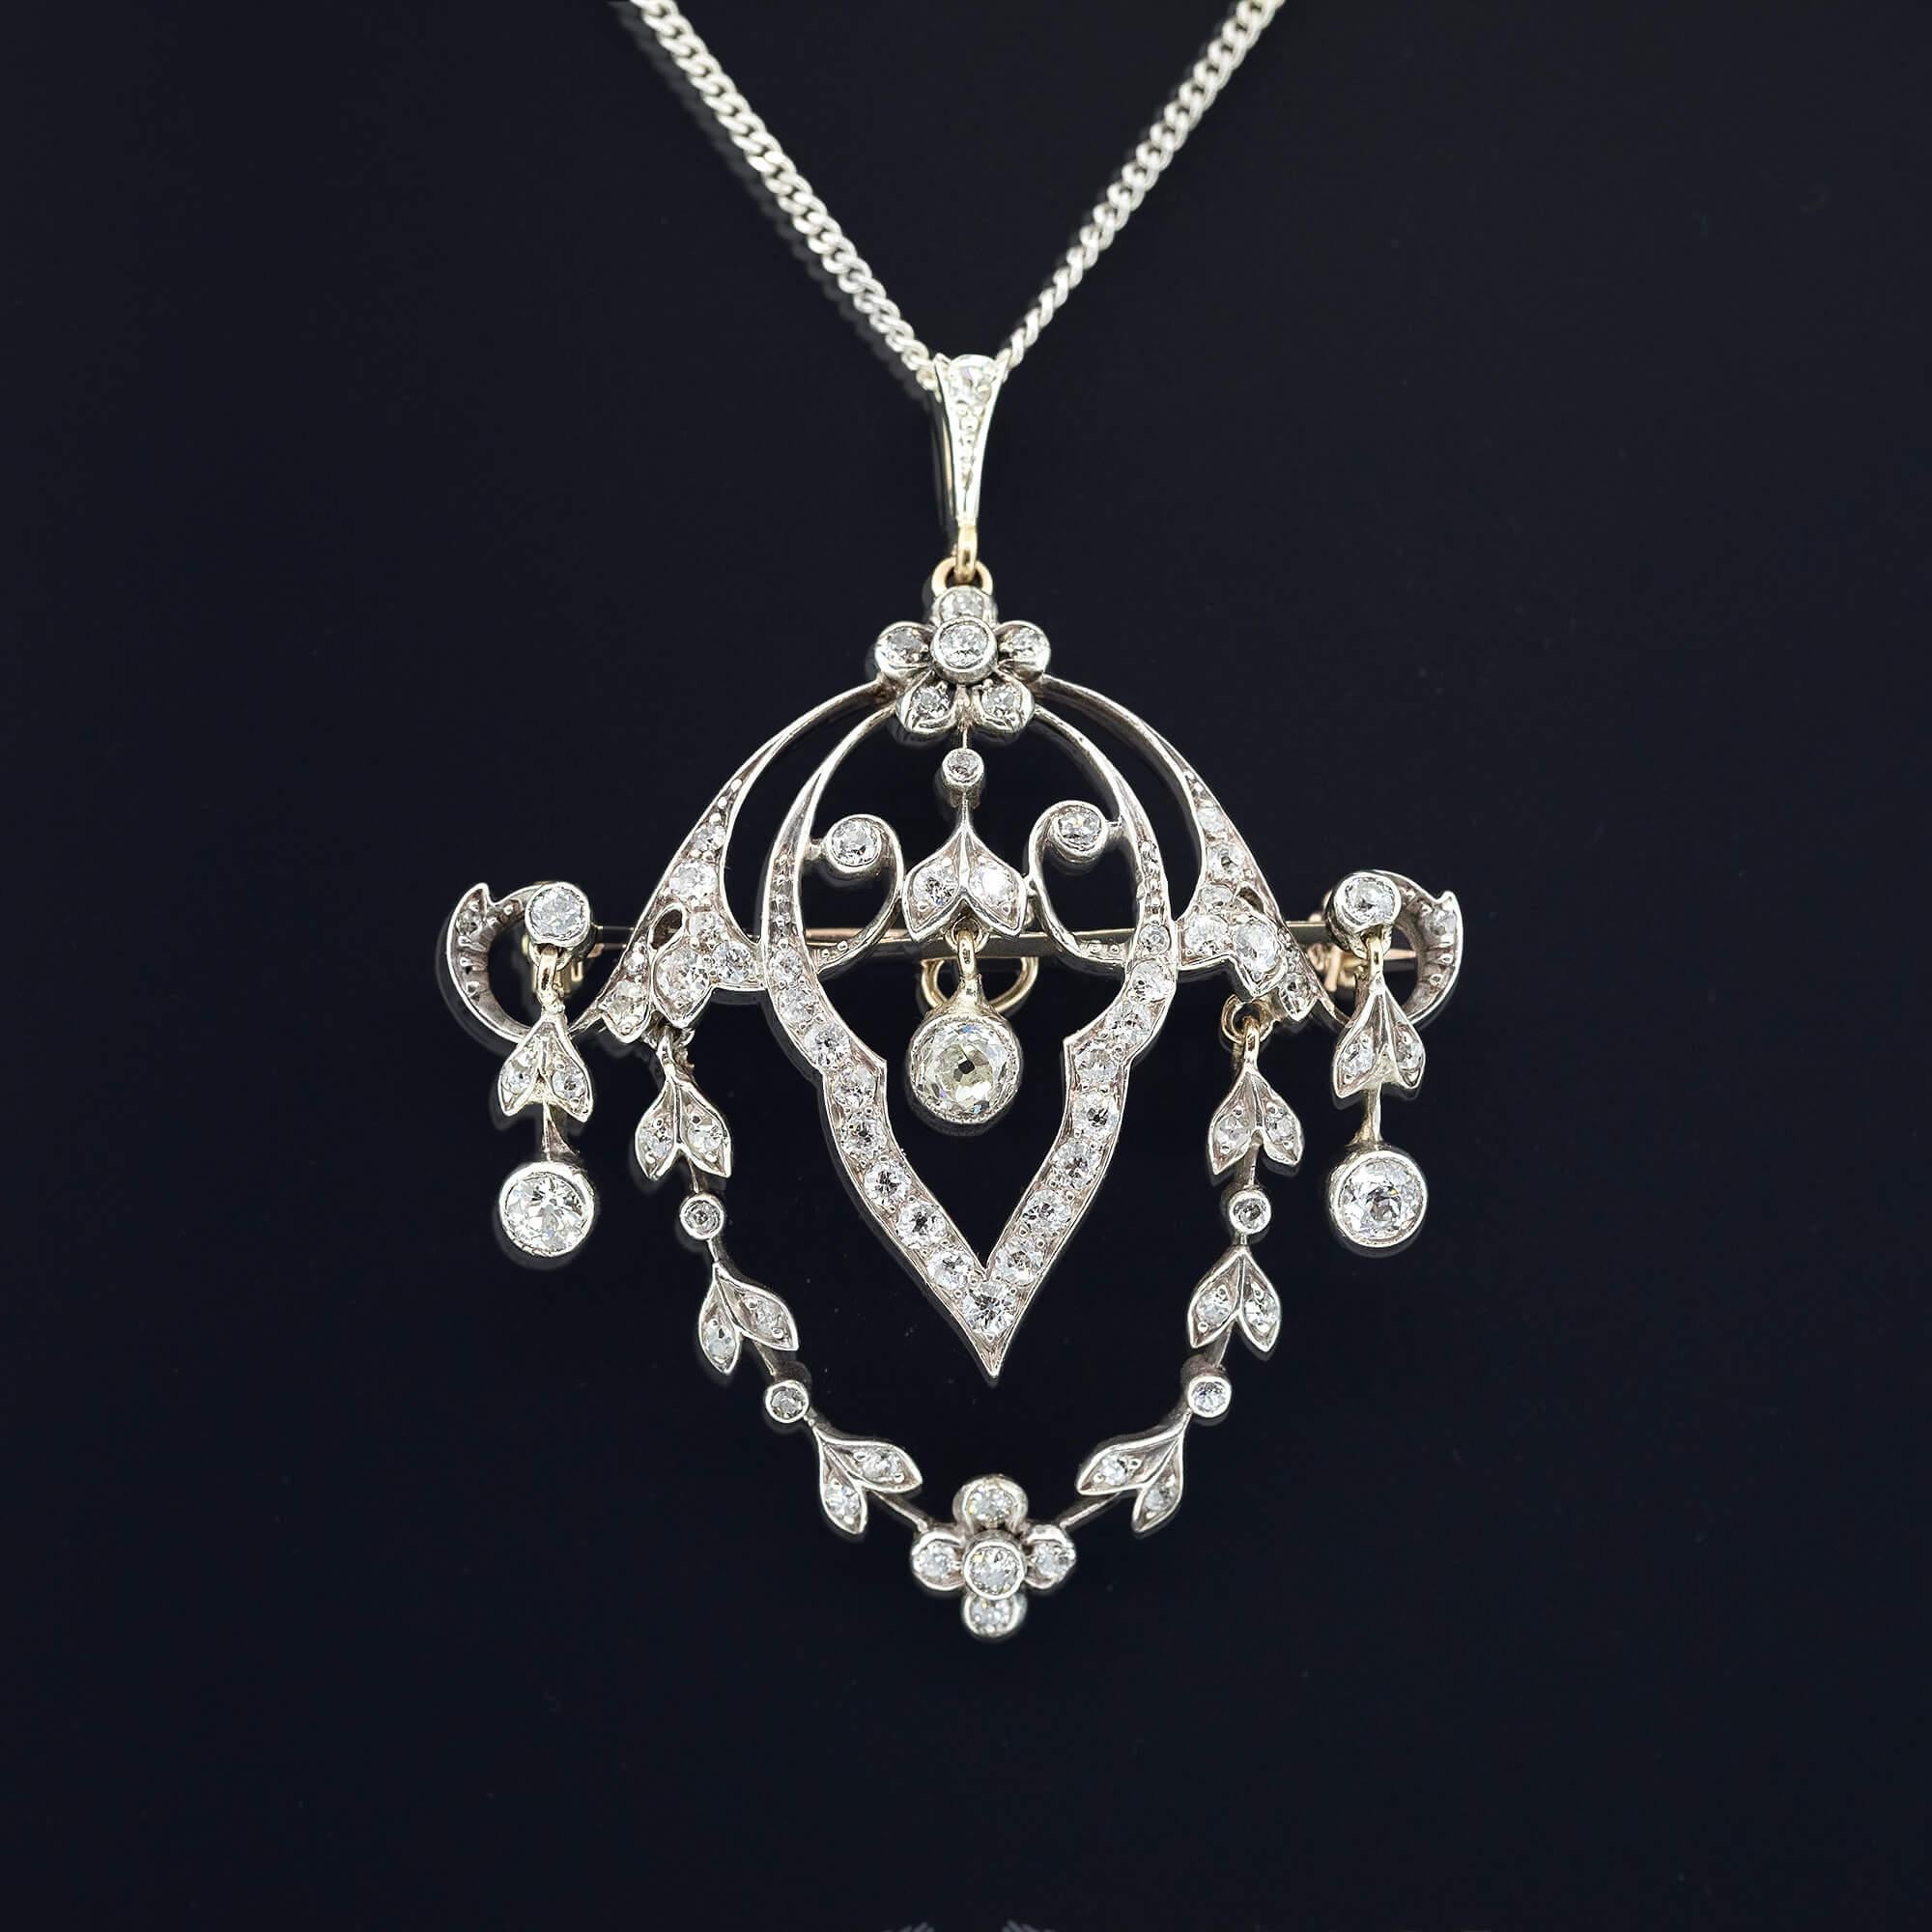 Belle Epoque diamond set convertible brooch/pendant with a collapsible pendant runner and removable brooch pin. Featuring florals, leaves, scrolls and drops. Chain sold separately.

Diamonds:
One 0.28ct old mine cut diamonds I-K, I1 material
Two